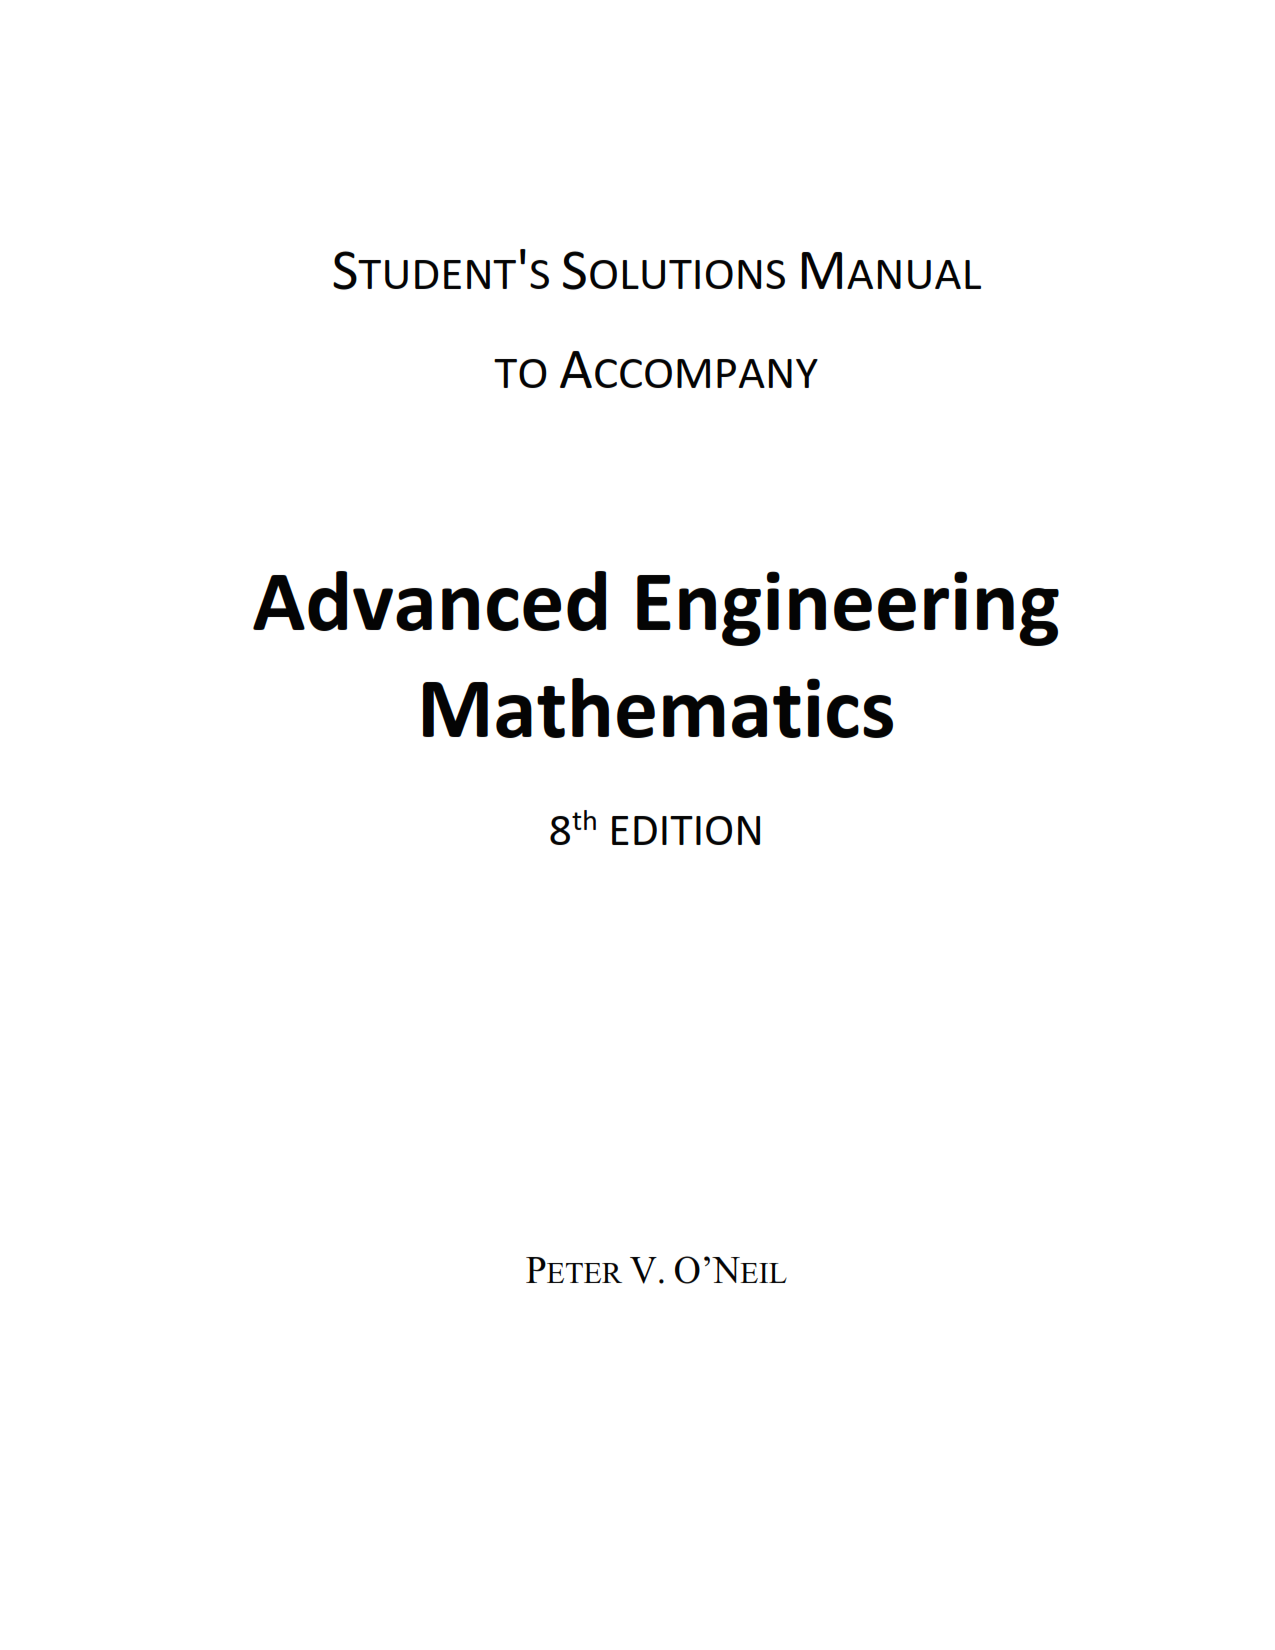 download free Solutions manual of advanced engineering mathematics Peter v o'neil 8th edition pdf | Gioumeh solution